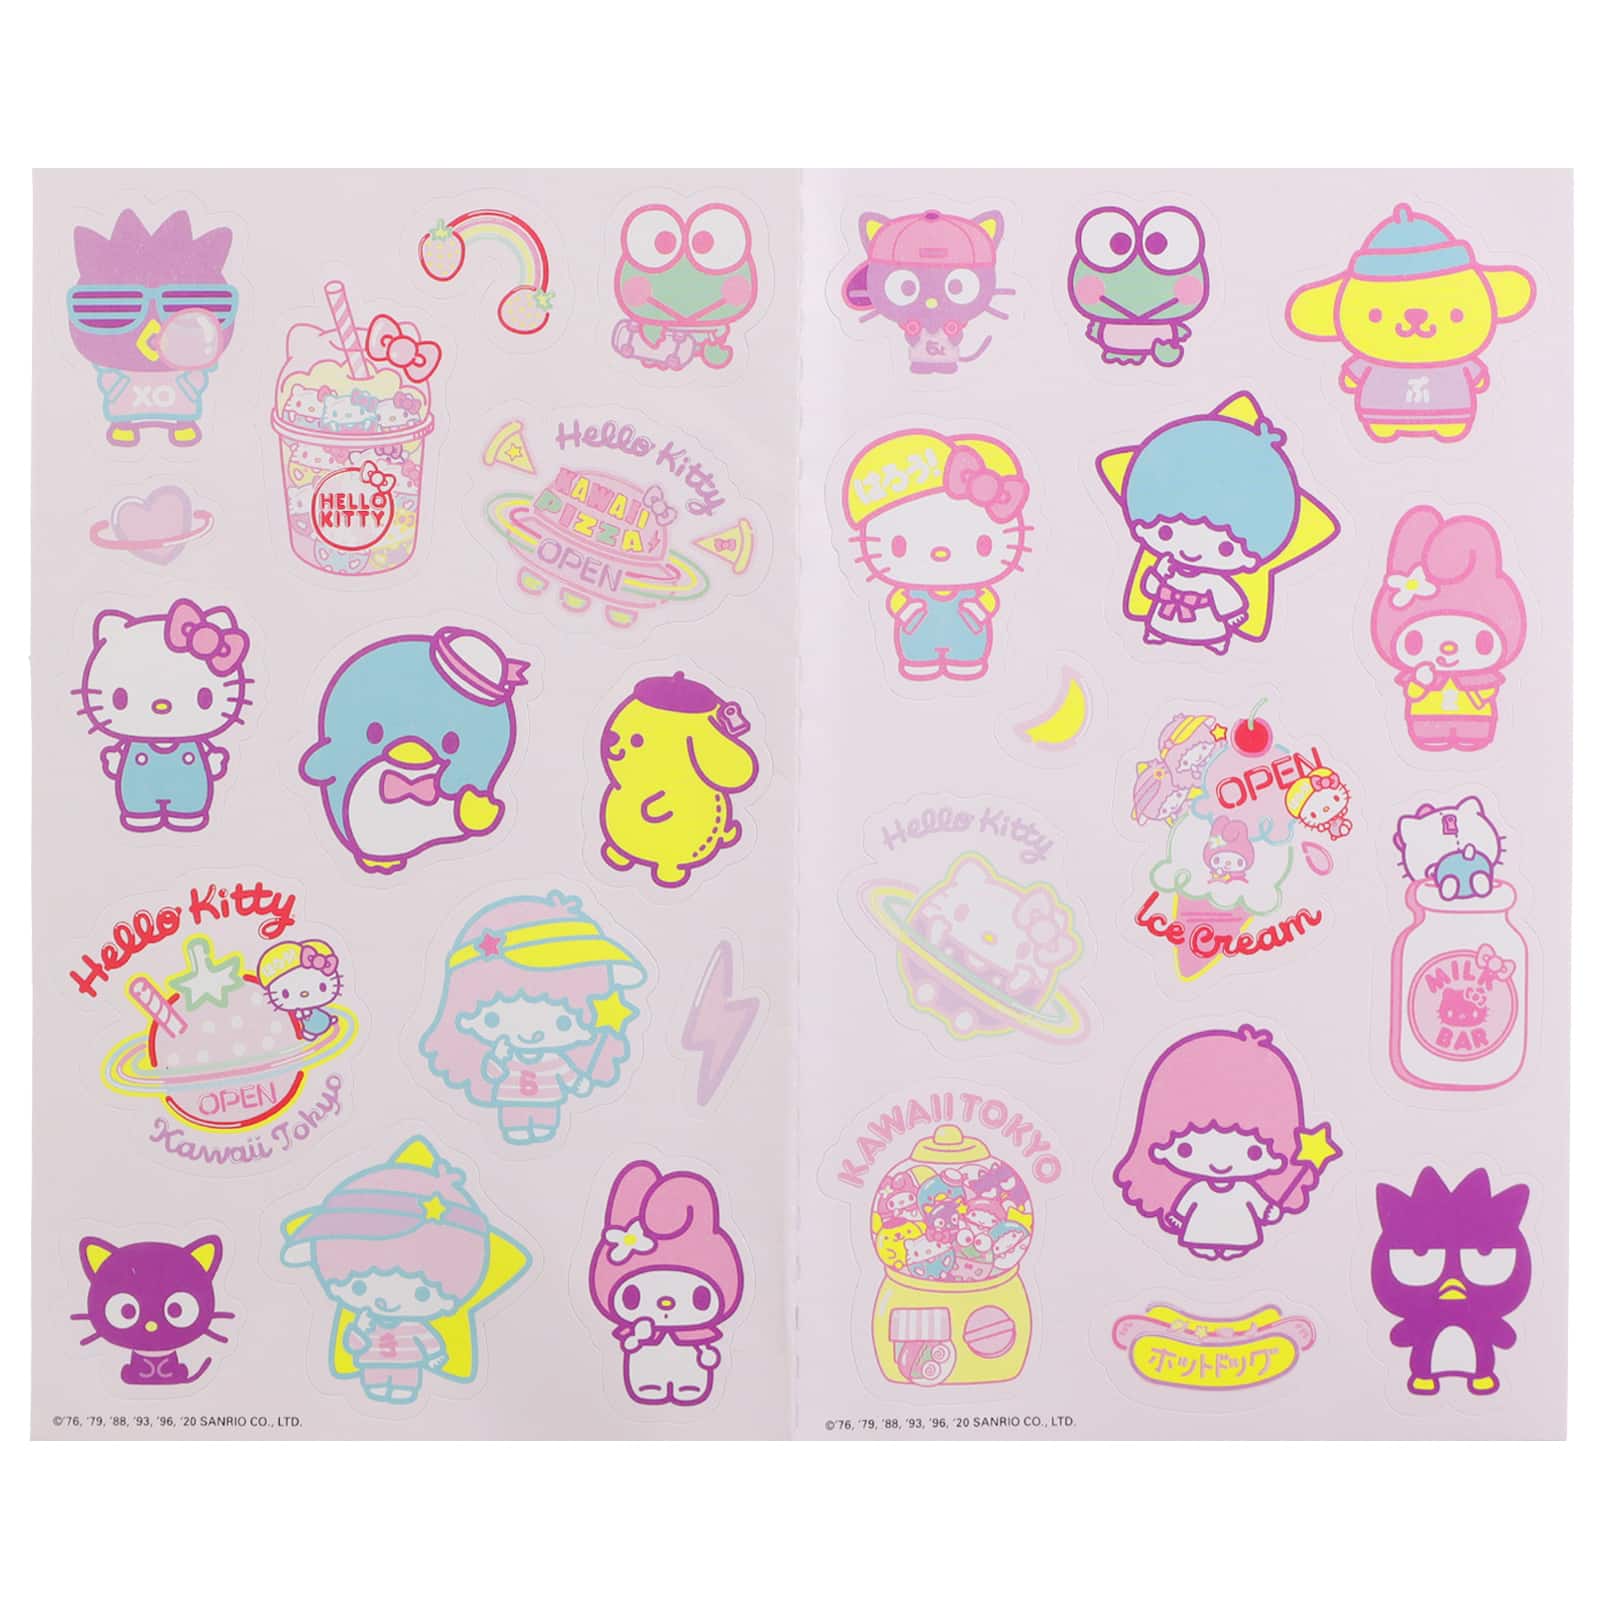  Hello Kitty Sanrio All Cheracters Stickers 4 Sizes Stickers :  Toys & Games